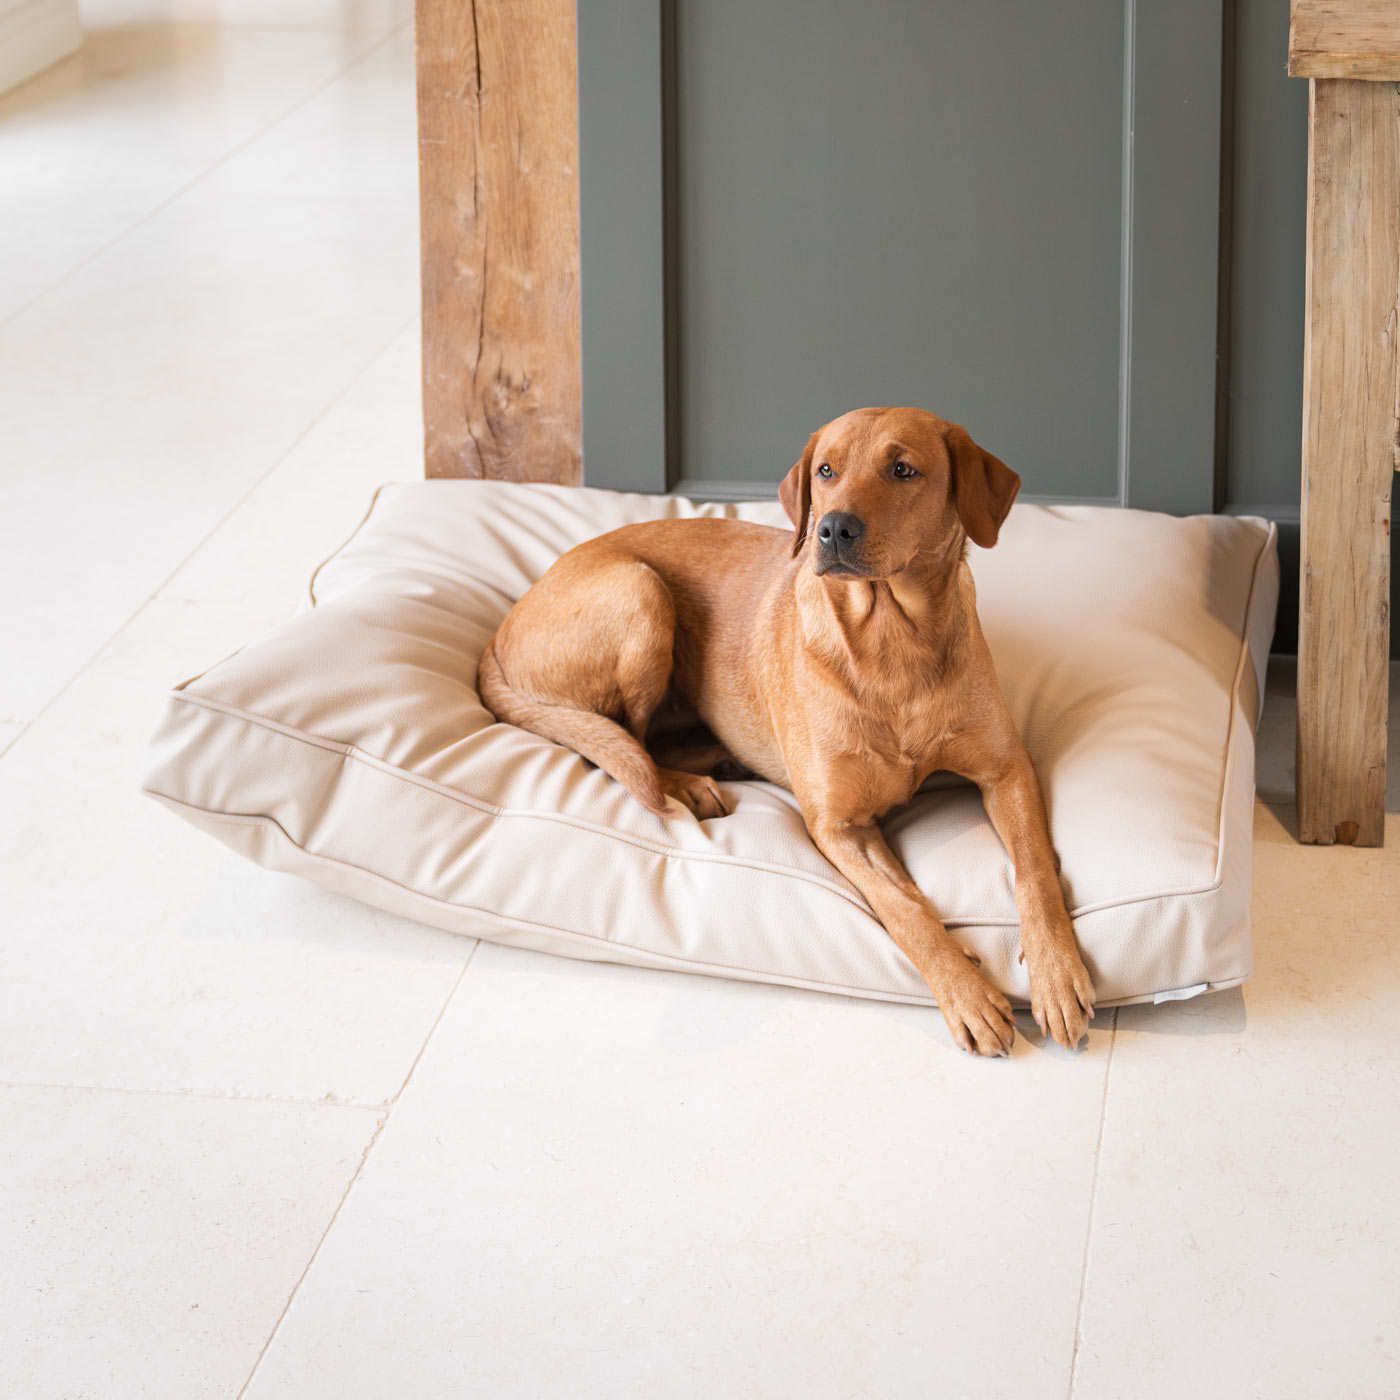  Luxury Dog Cushion in Rhino Tough Desert Faux Leather in Sand. The Perfect Pet Bed Time Accessory! Available Now at Lords & Labradors US